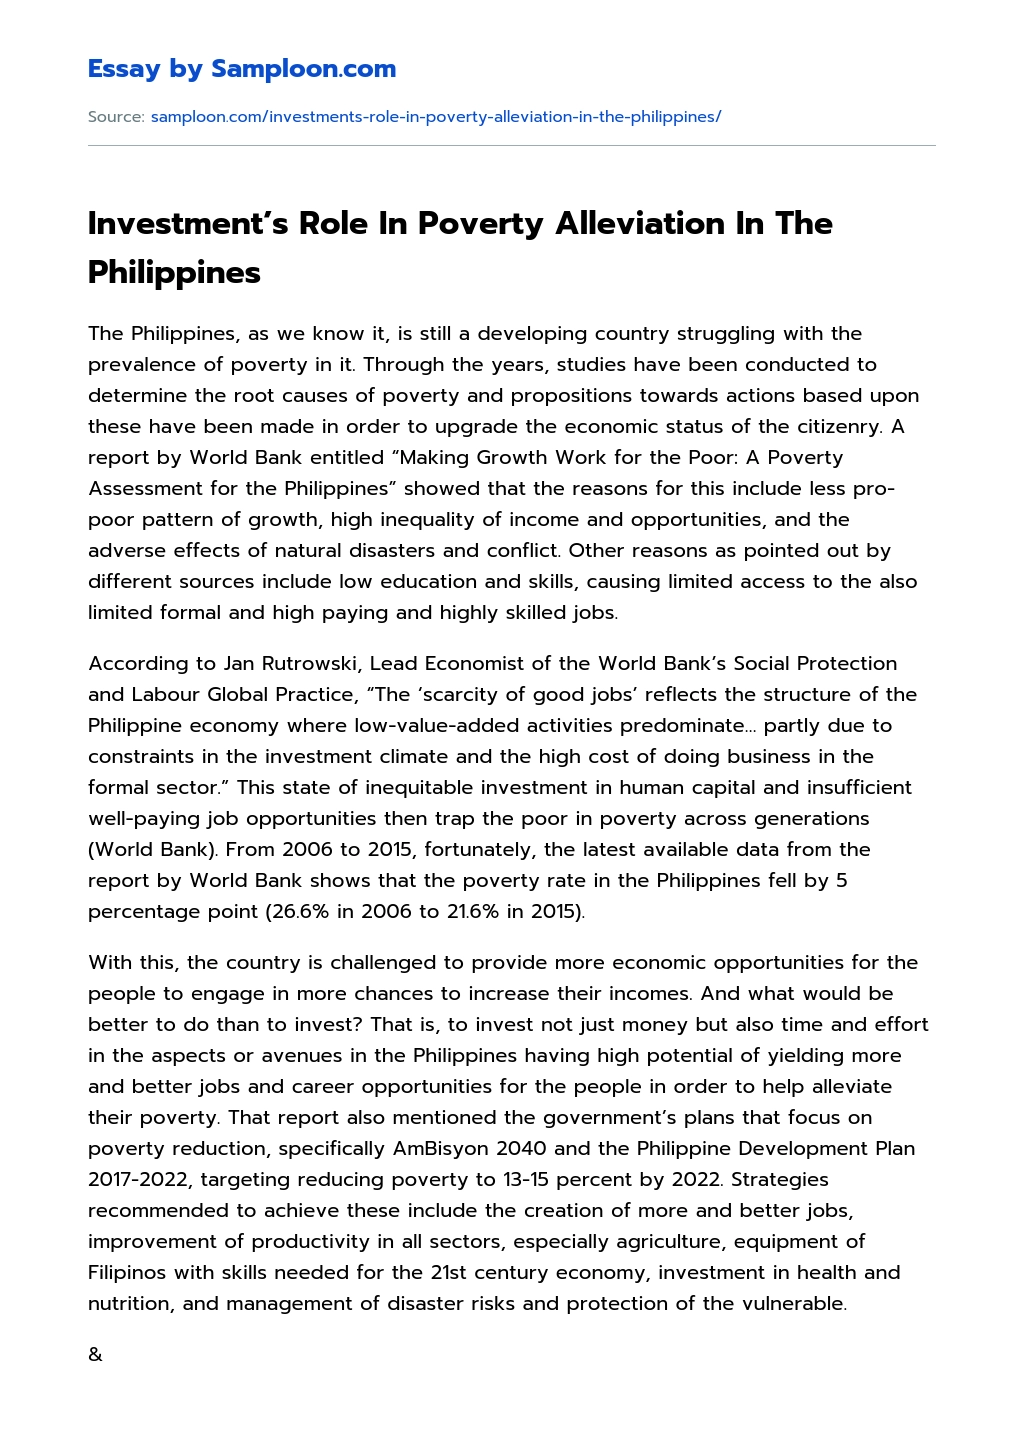 Investment’s Role In Poverty Alleviation In The Philippines essay